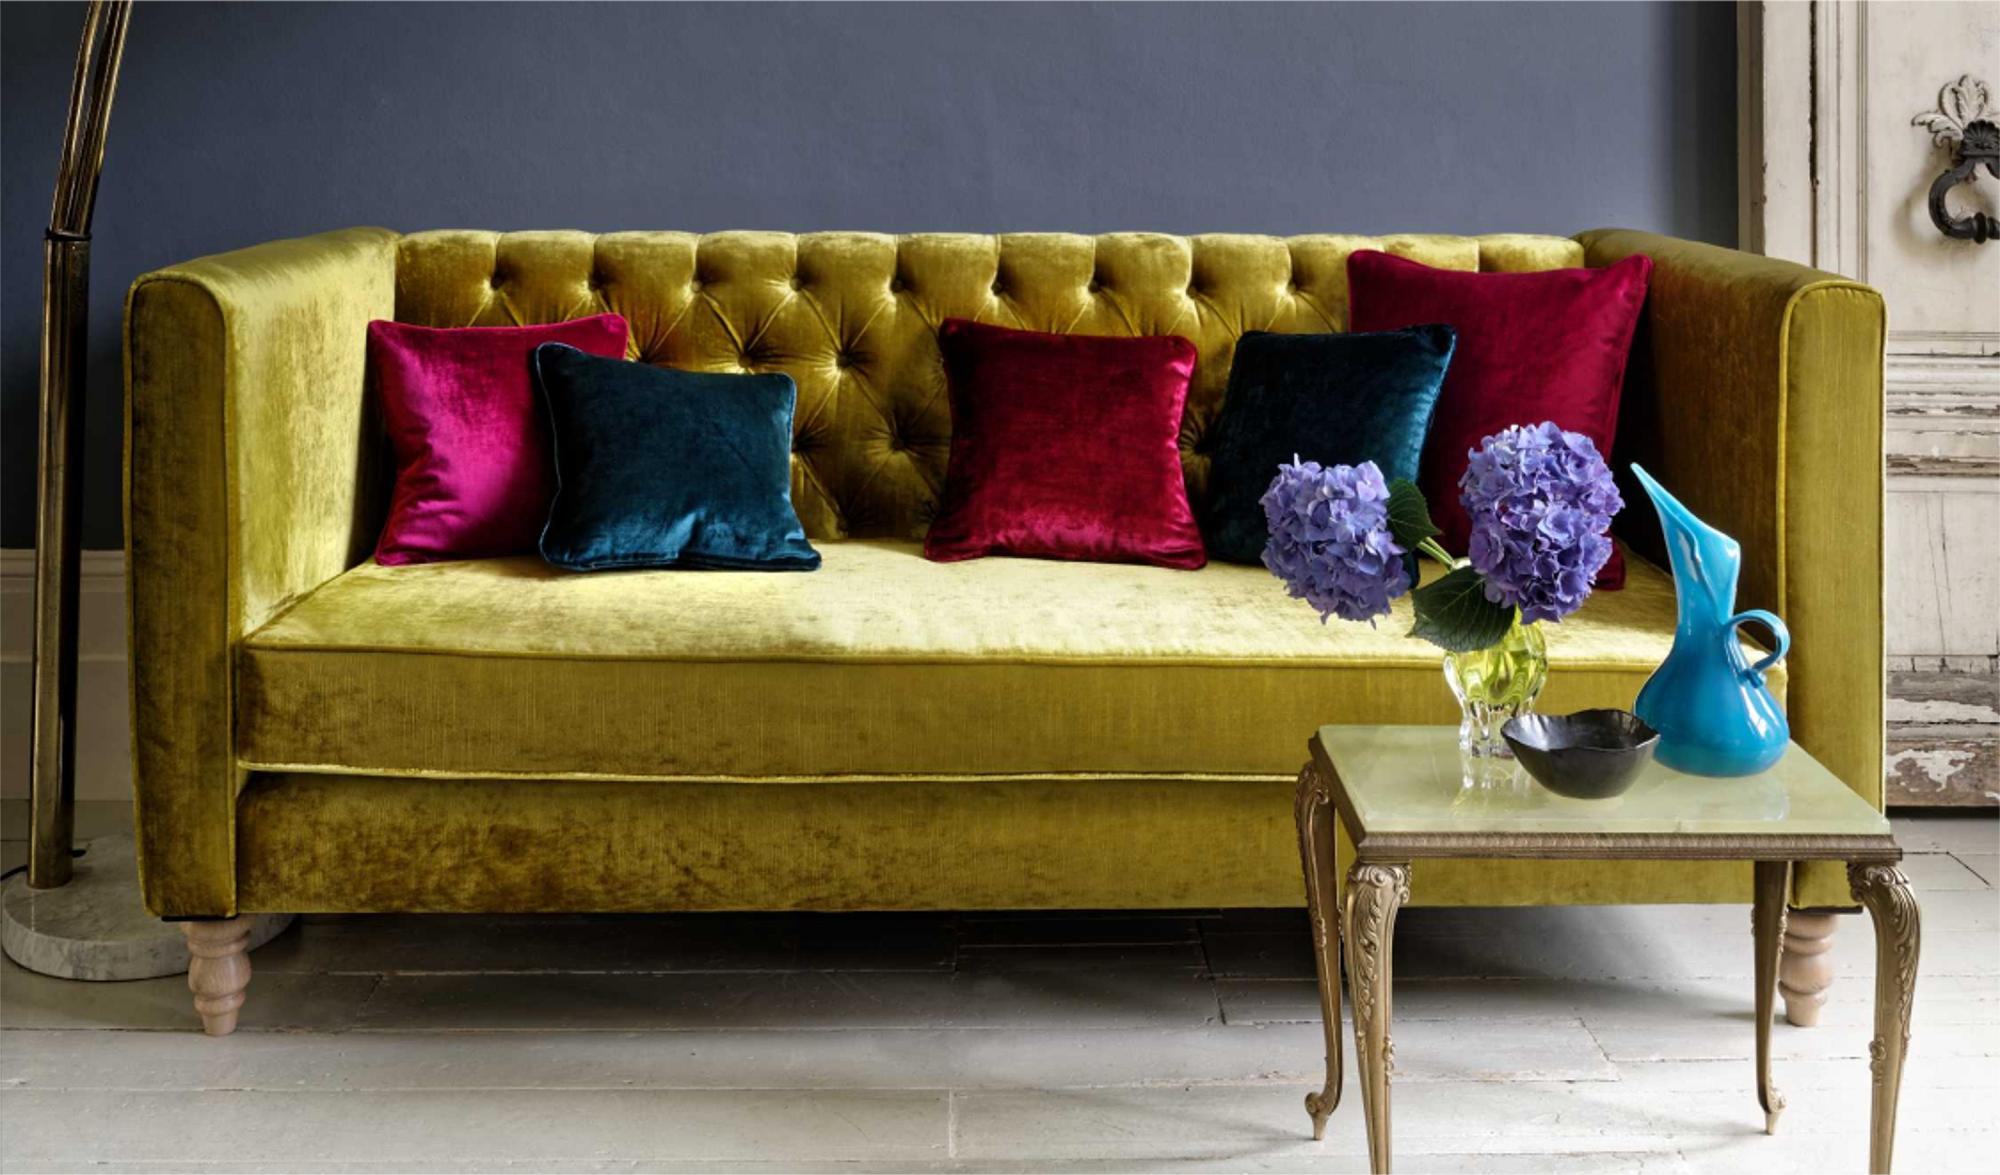 Contemporary settee in mustard with cushion range - sofas designed to your requirements by Interior Mood, County Carlow, Ireland